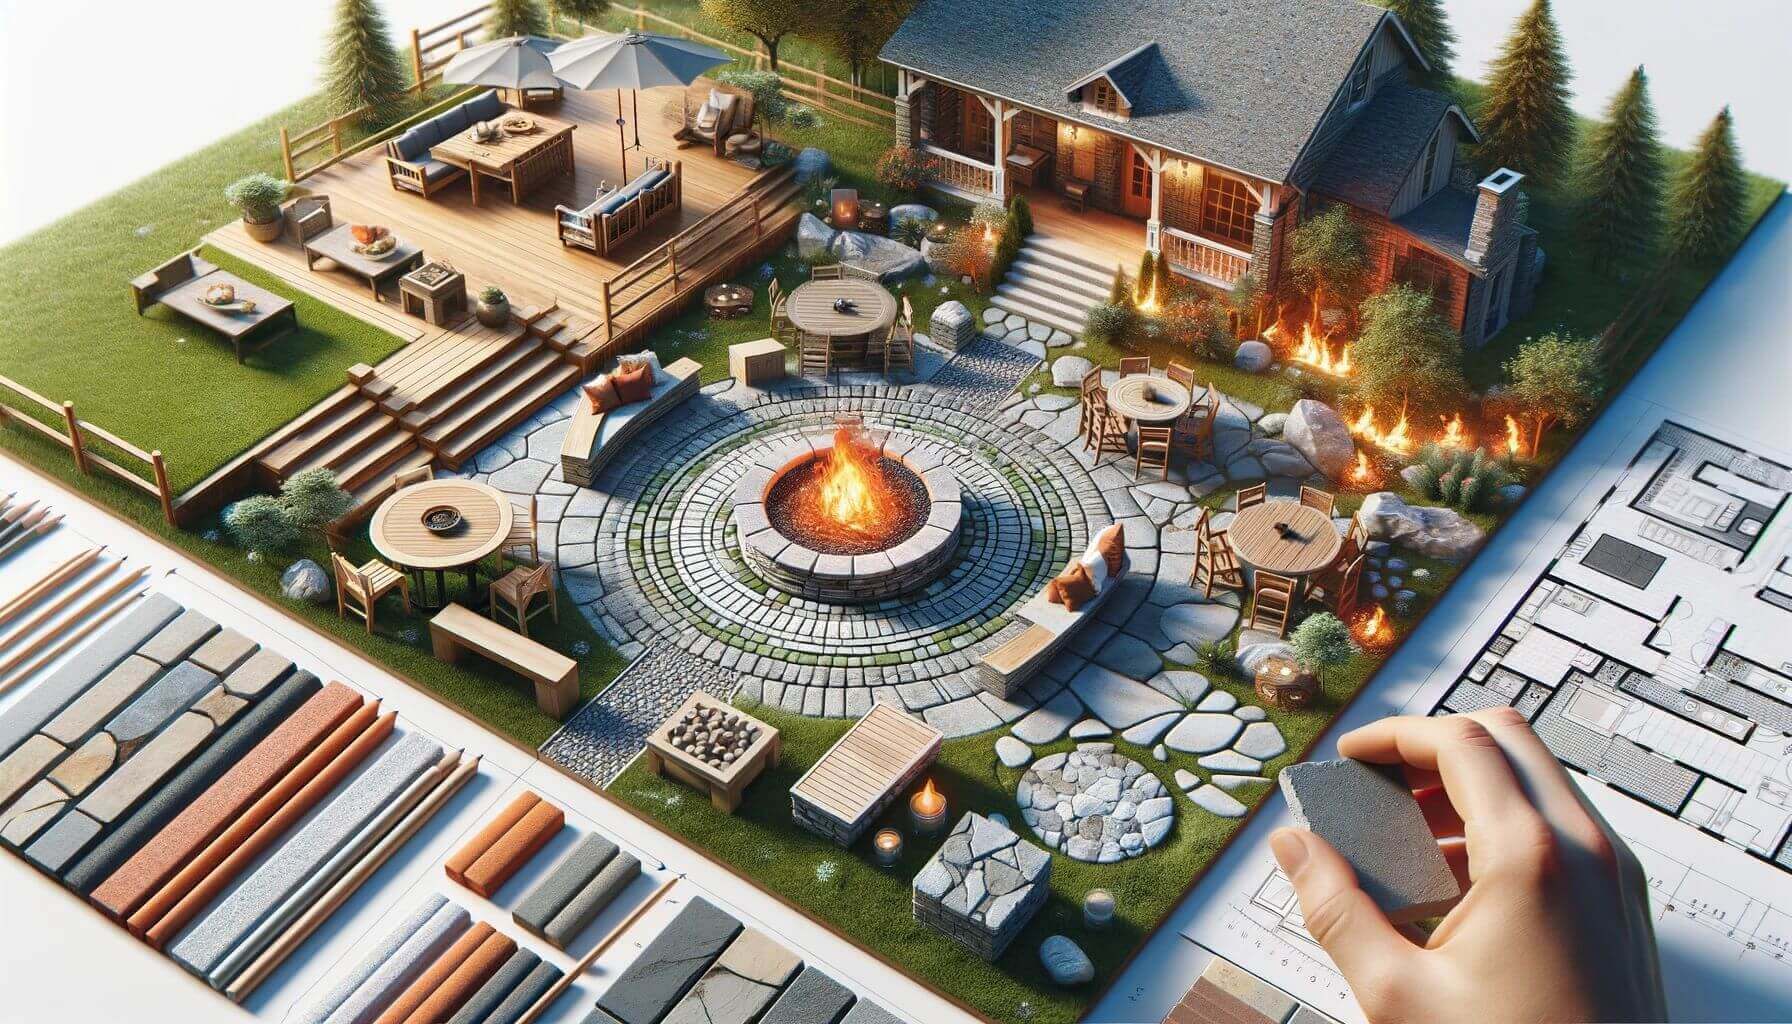 Masonry fire pits tips for cozy outdoors